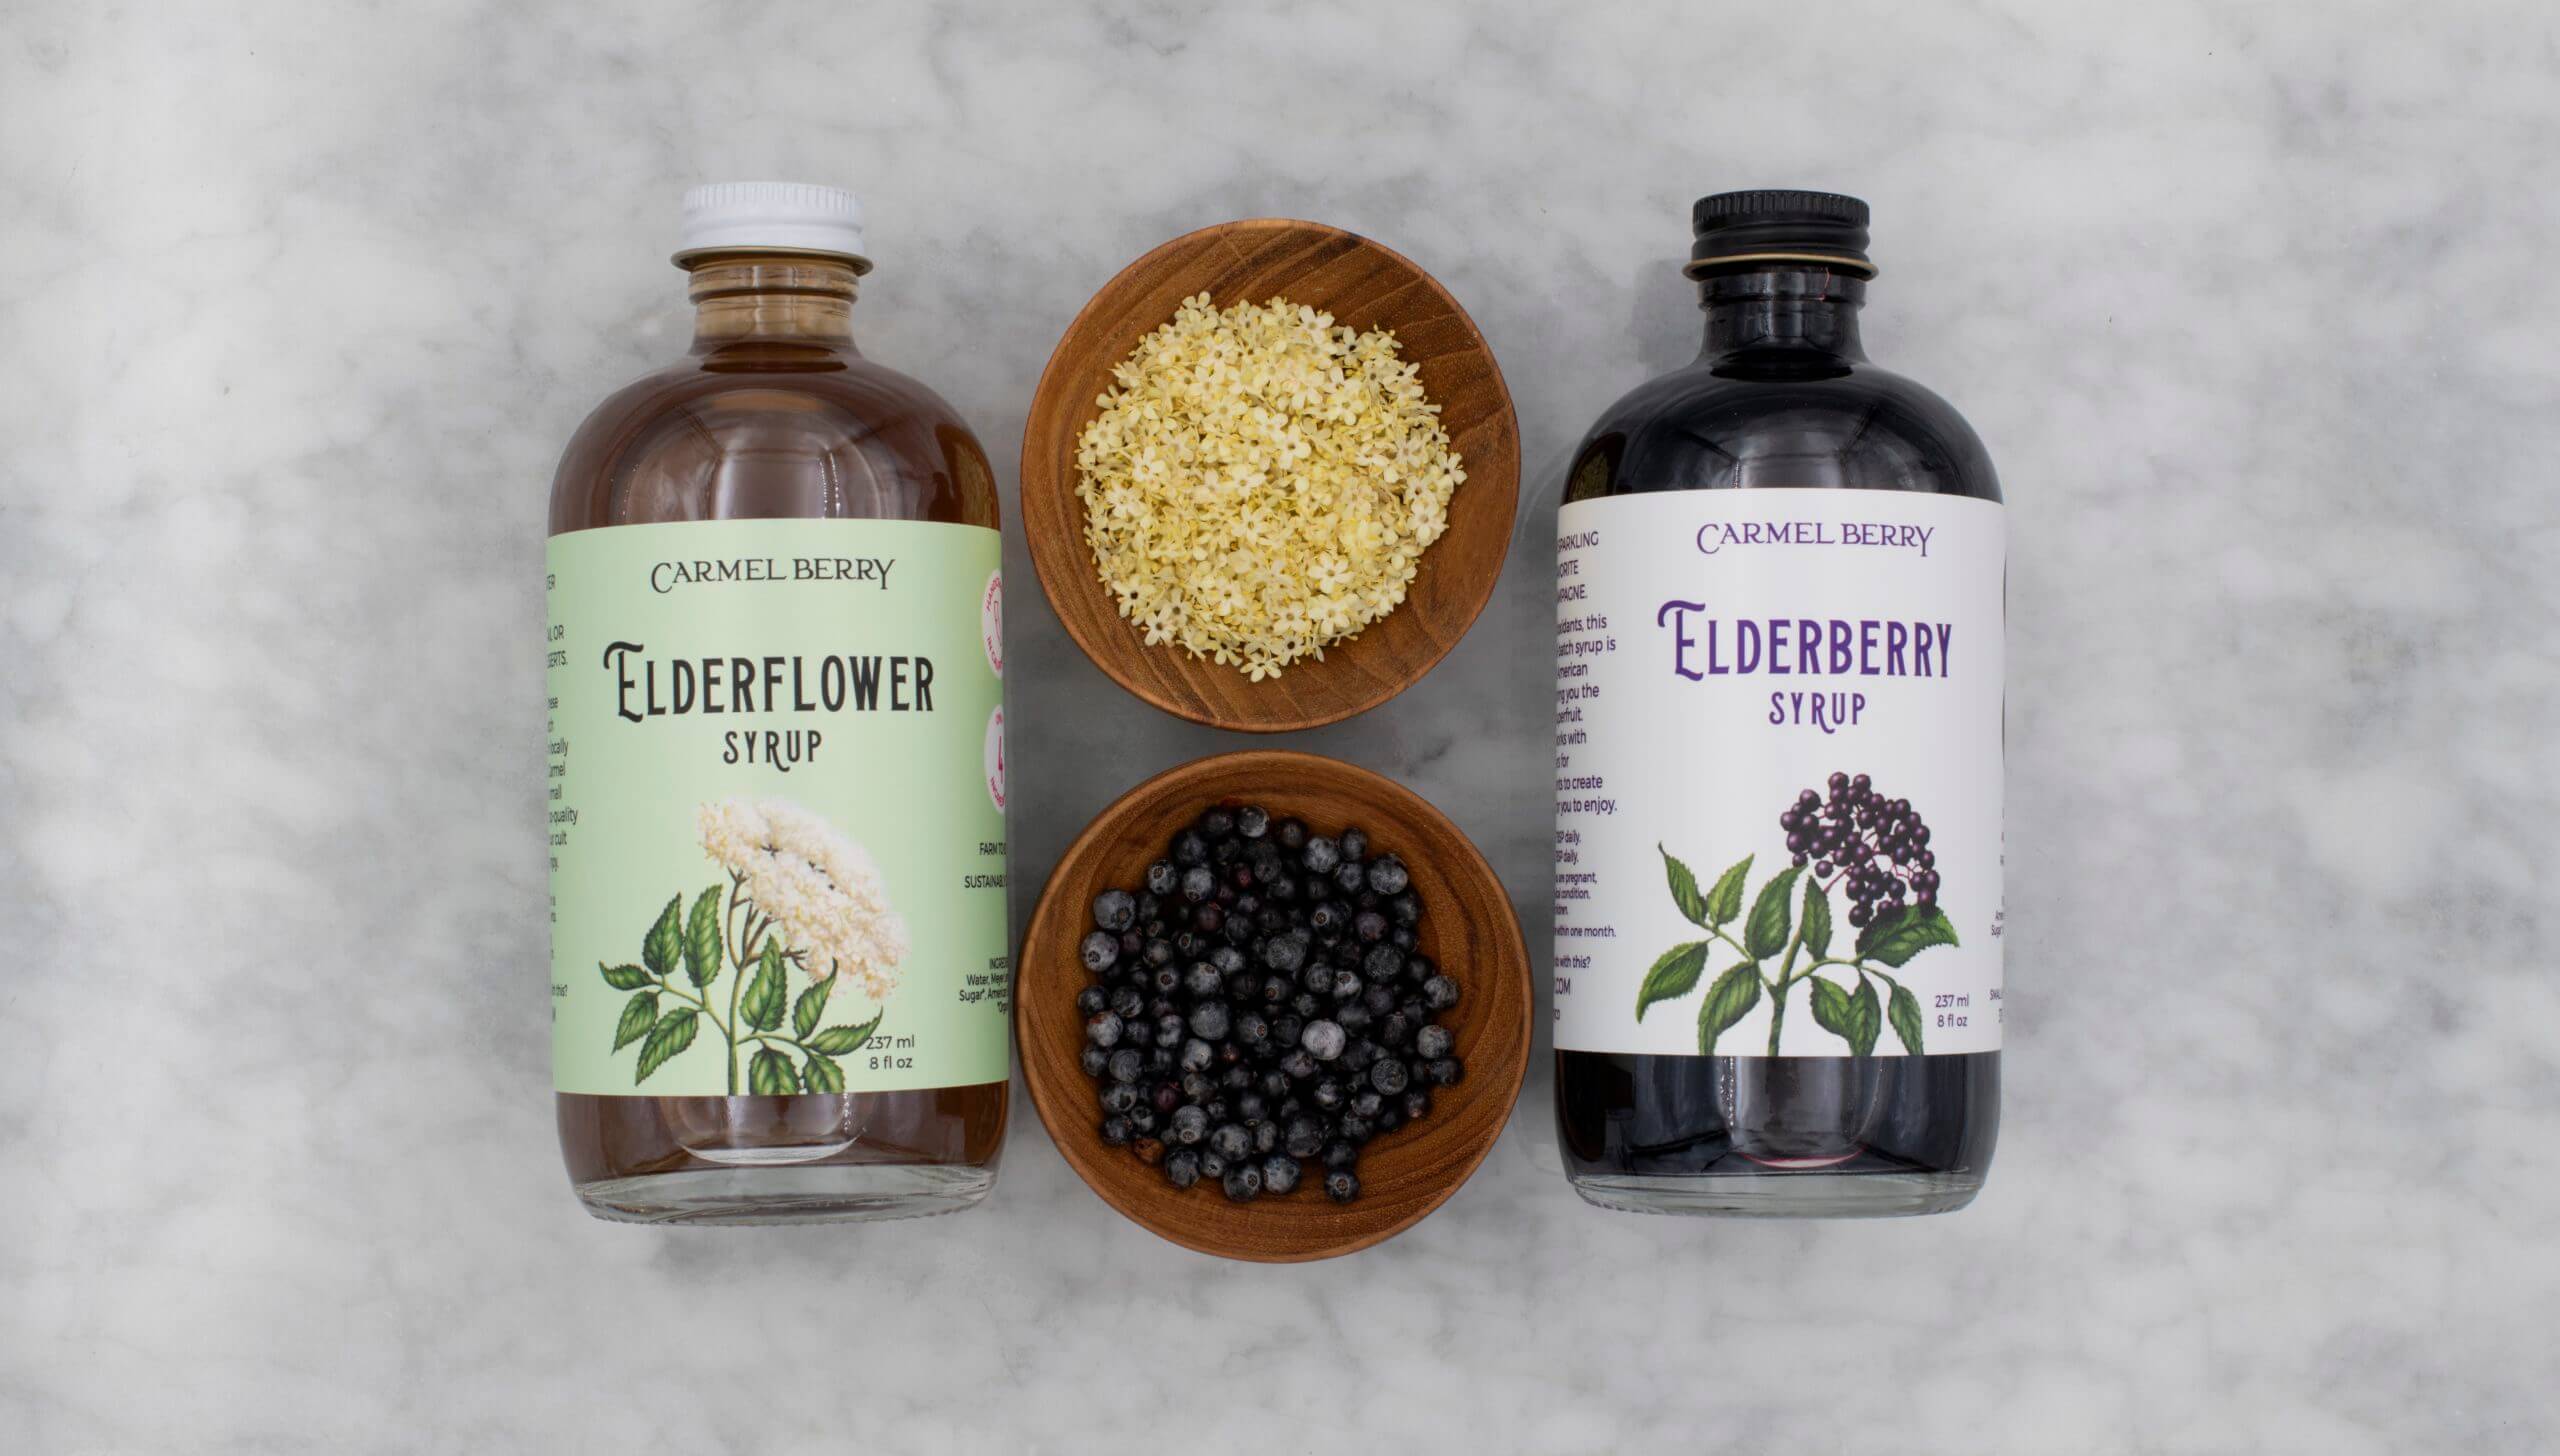 Carmel Berry Elderflower syrup and elderberry syrup with bowls of ingredients